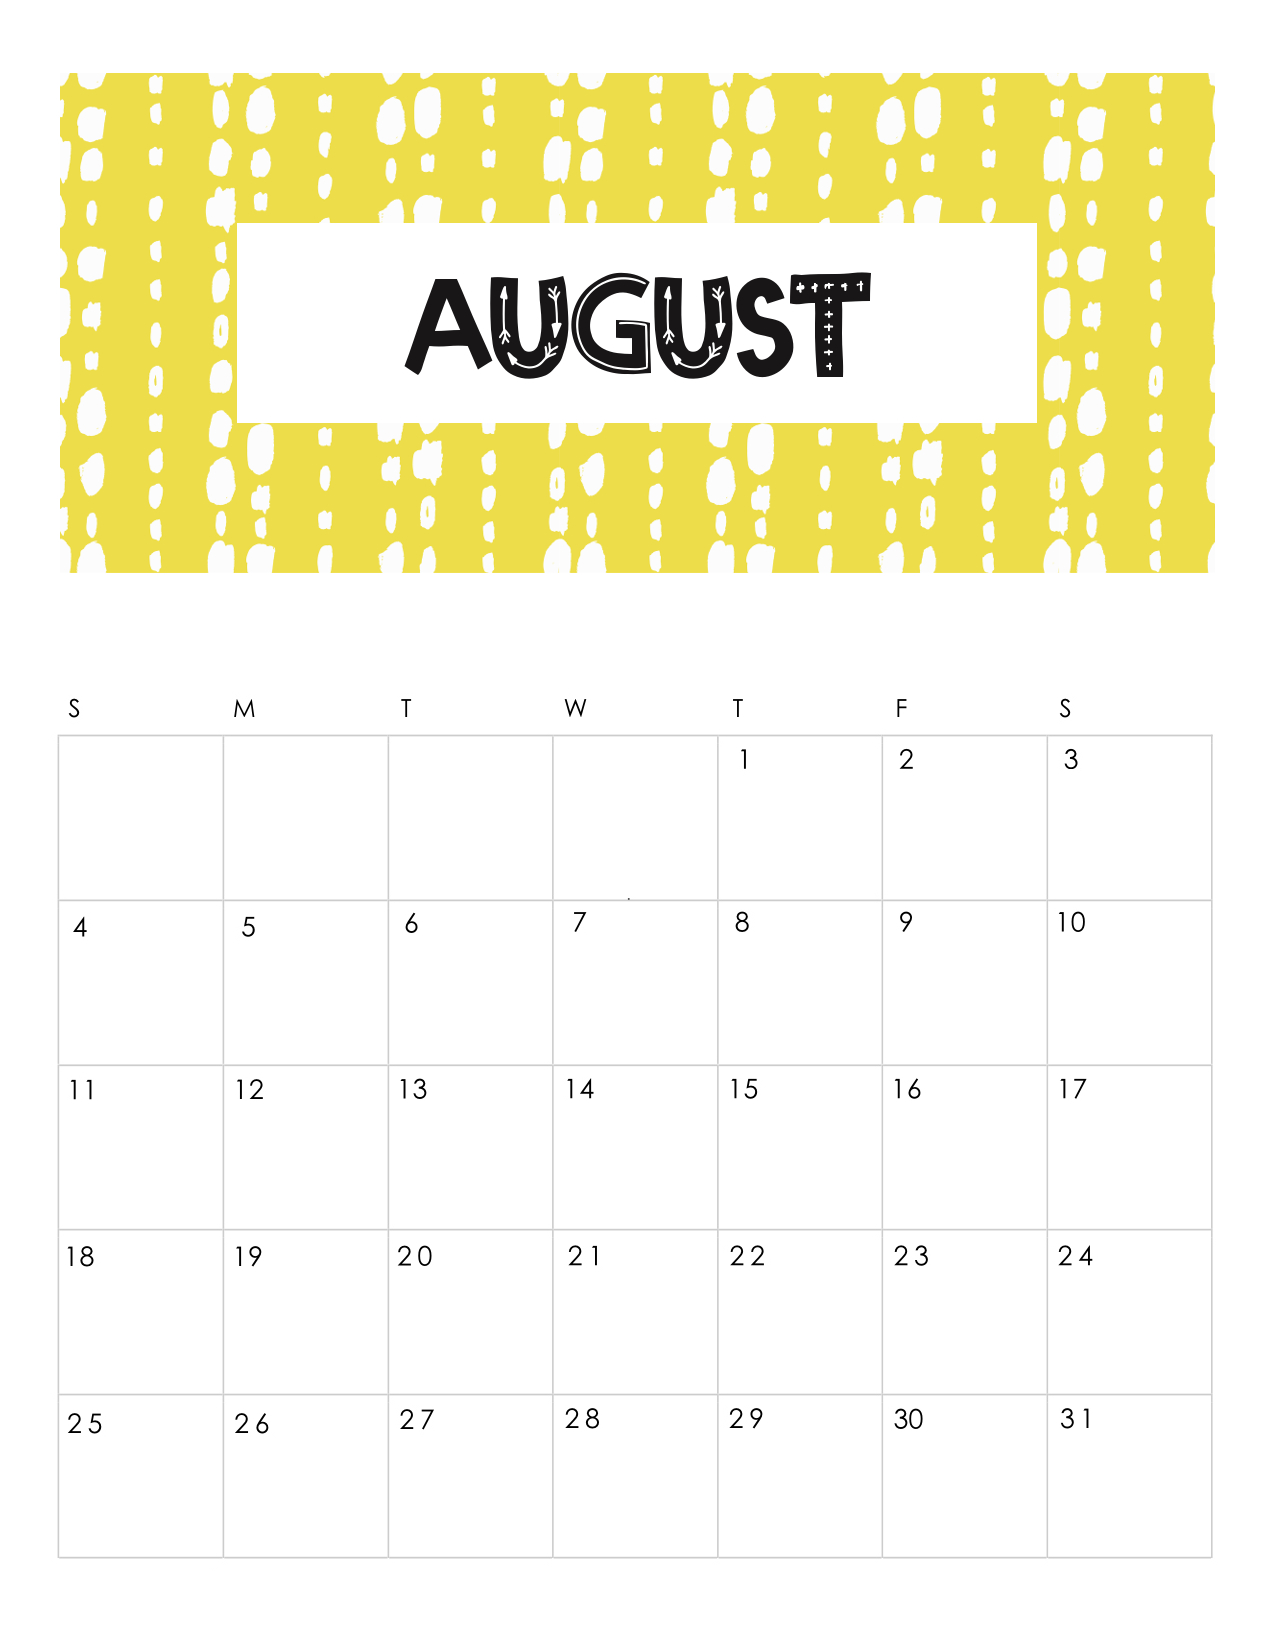 free-printable-abstract-patterned-calendar-2019-august.jpg